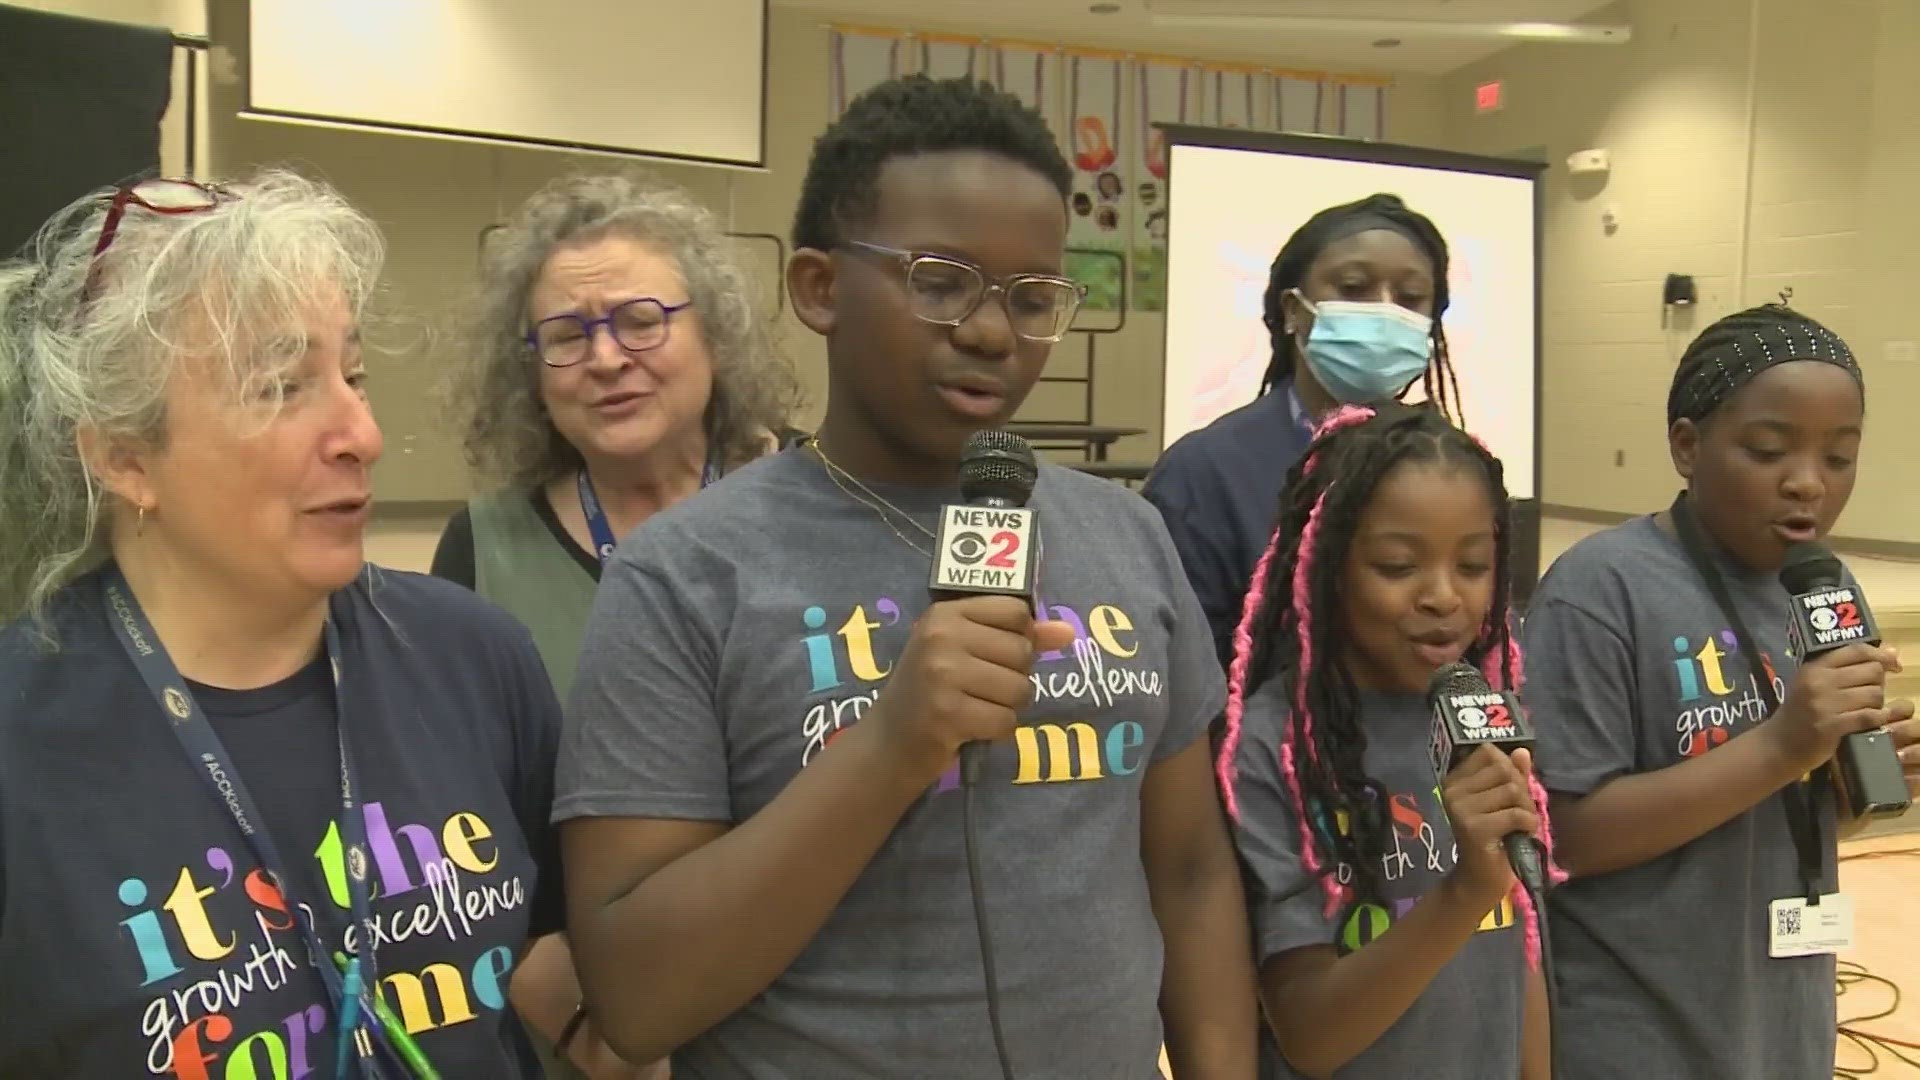 WFMY News 2 helps spread the gift of reading with kids at Erwin Montessori school.